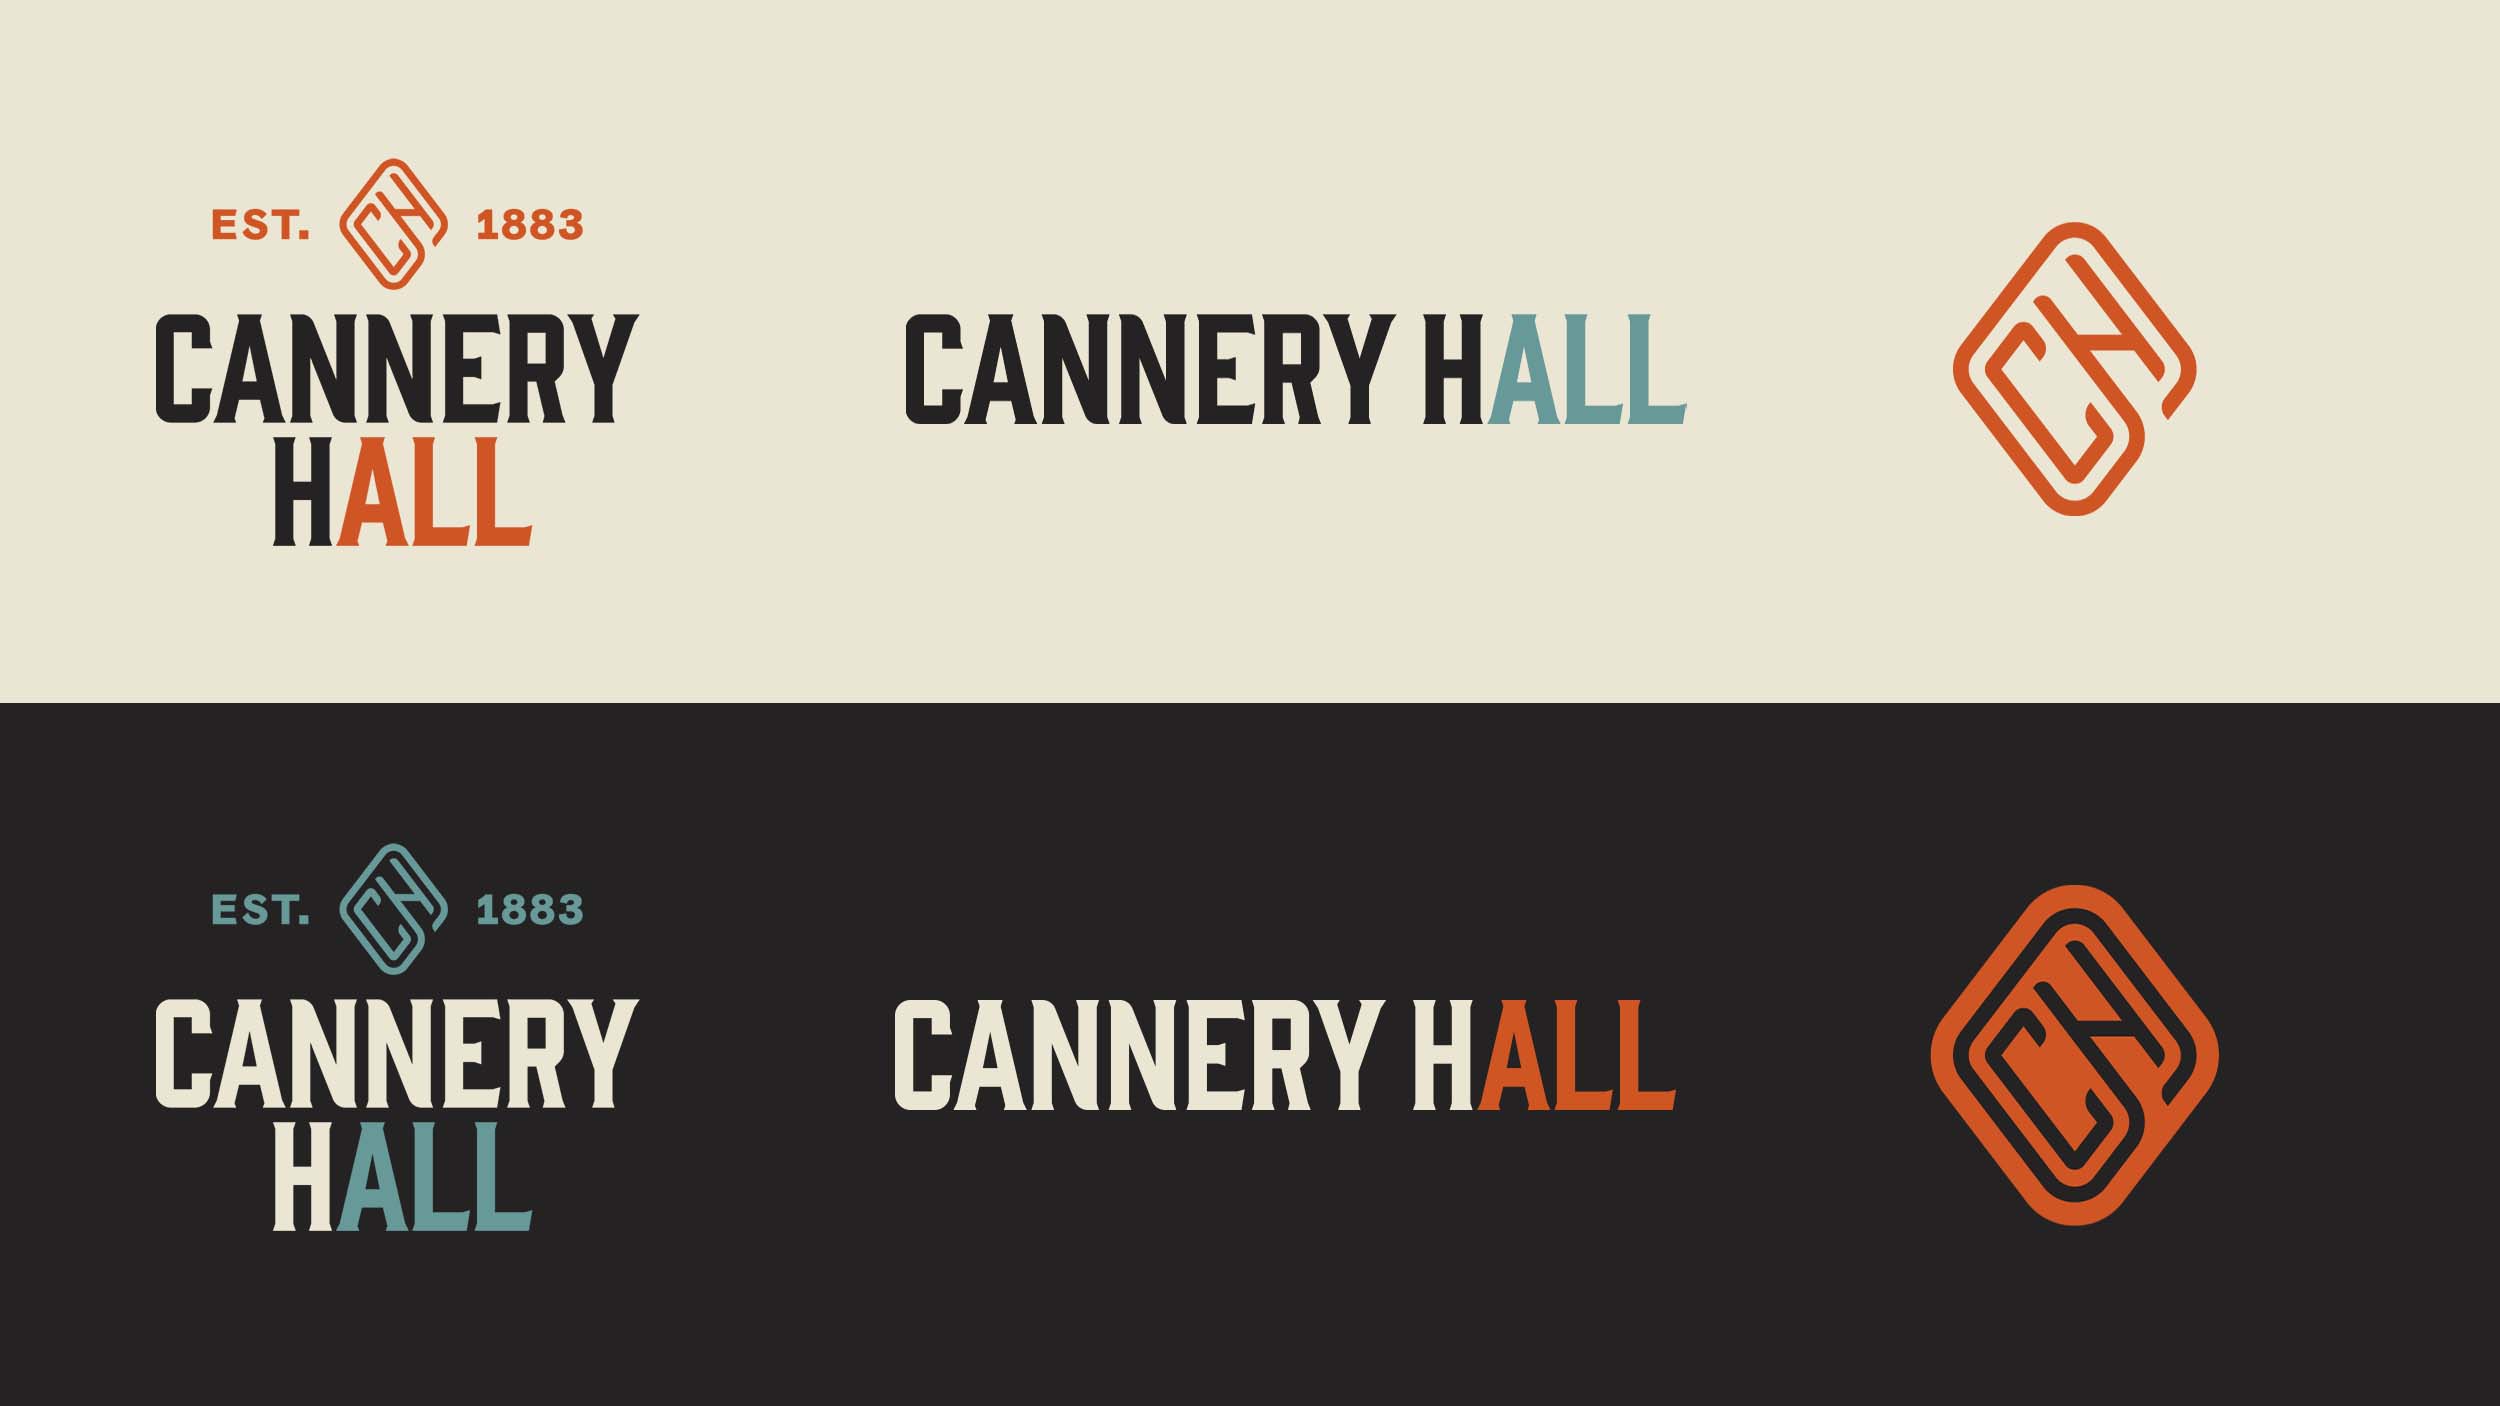 Variations of the Cannery Hall logo lockup.